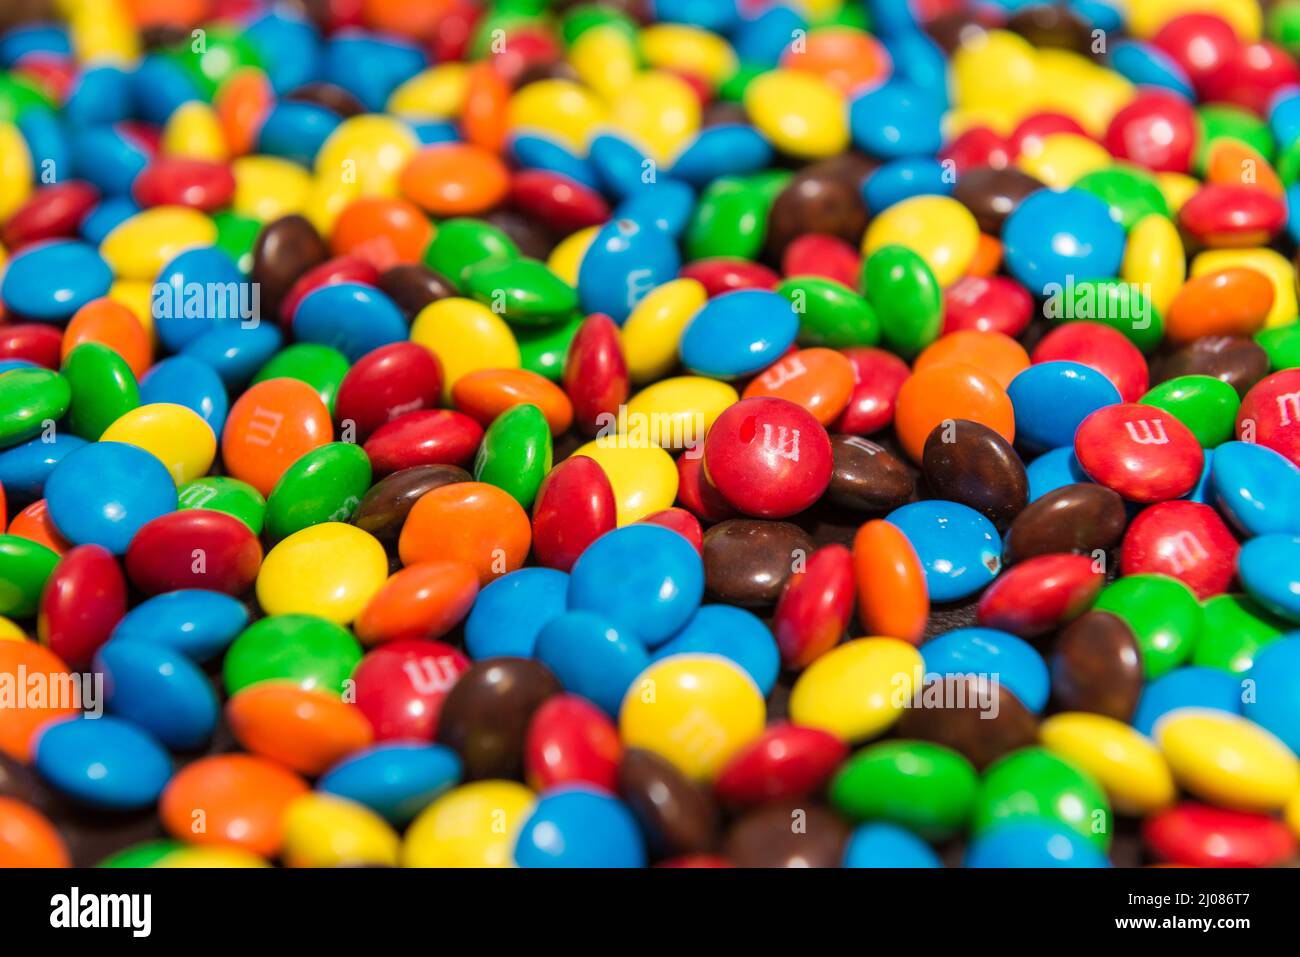 inner view of a birthday cake filled with colorful m&m and other candies Stock Photo